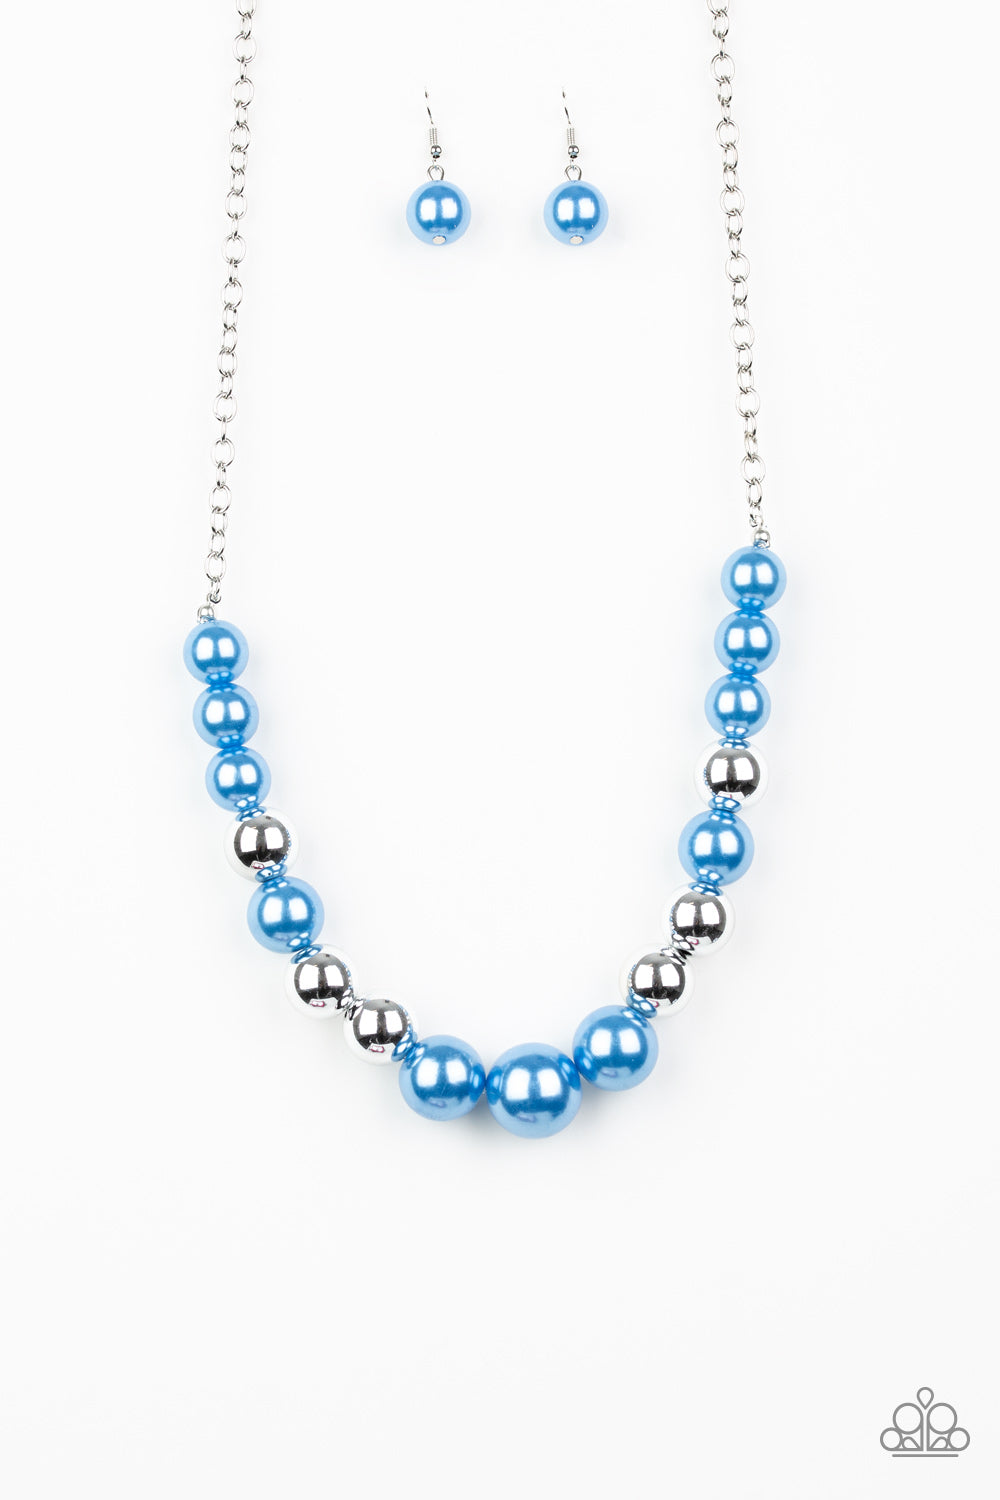 Take Note - Blue - Spiffy Chick Jewelry